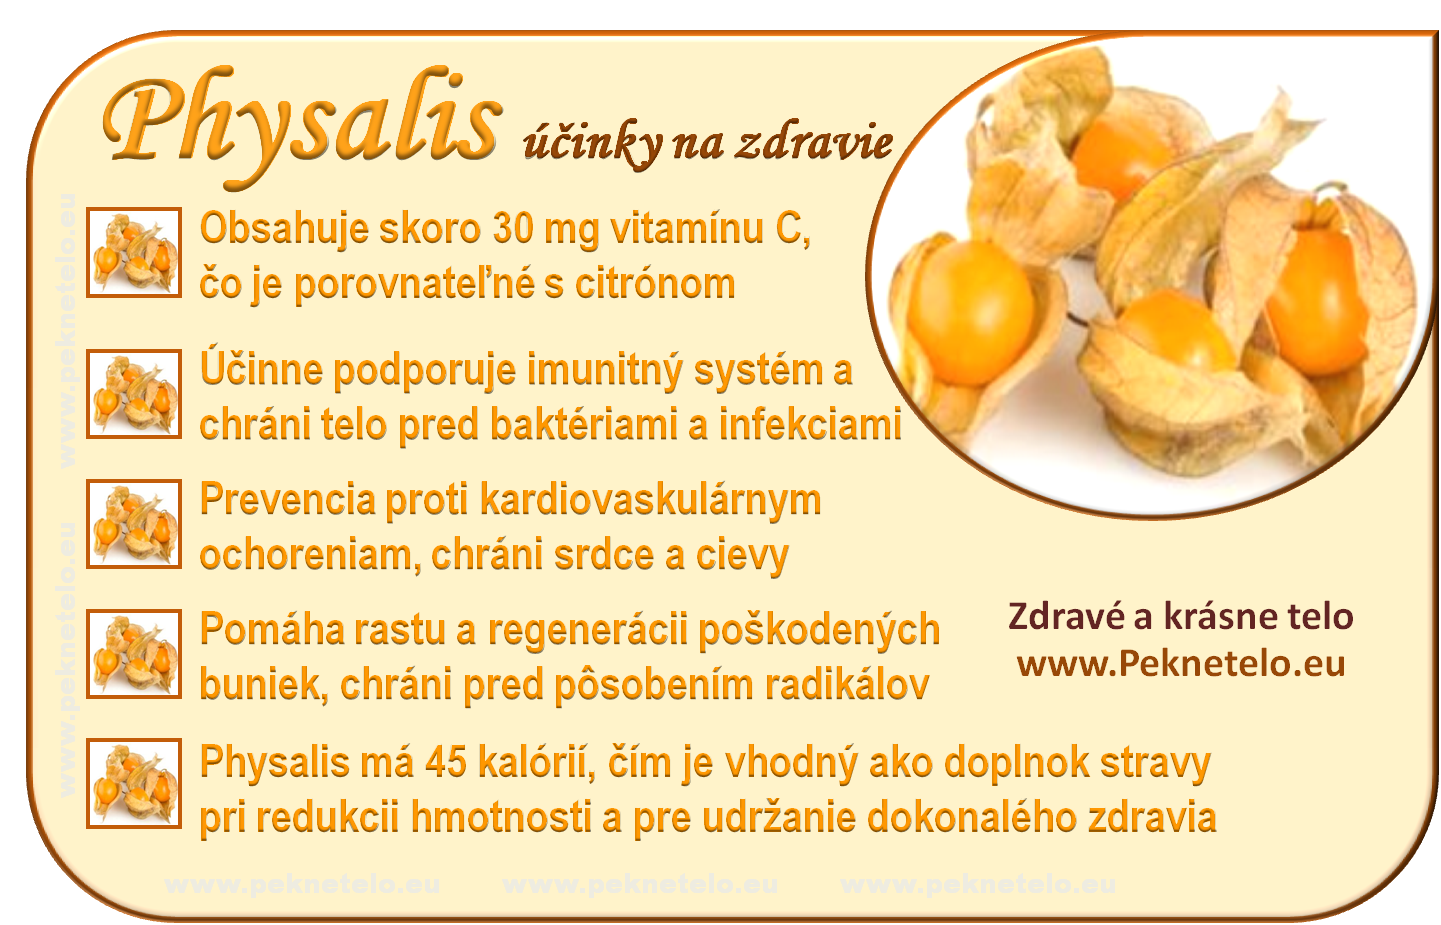 Co je to physalis?